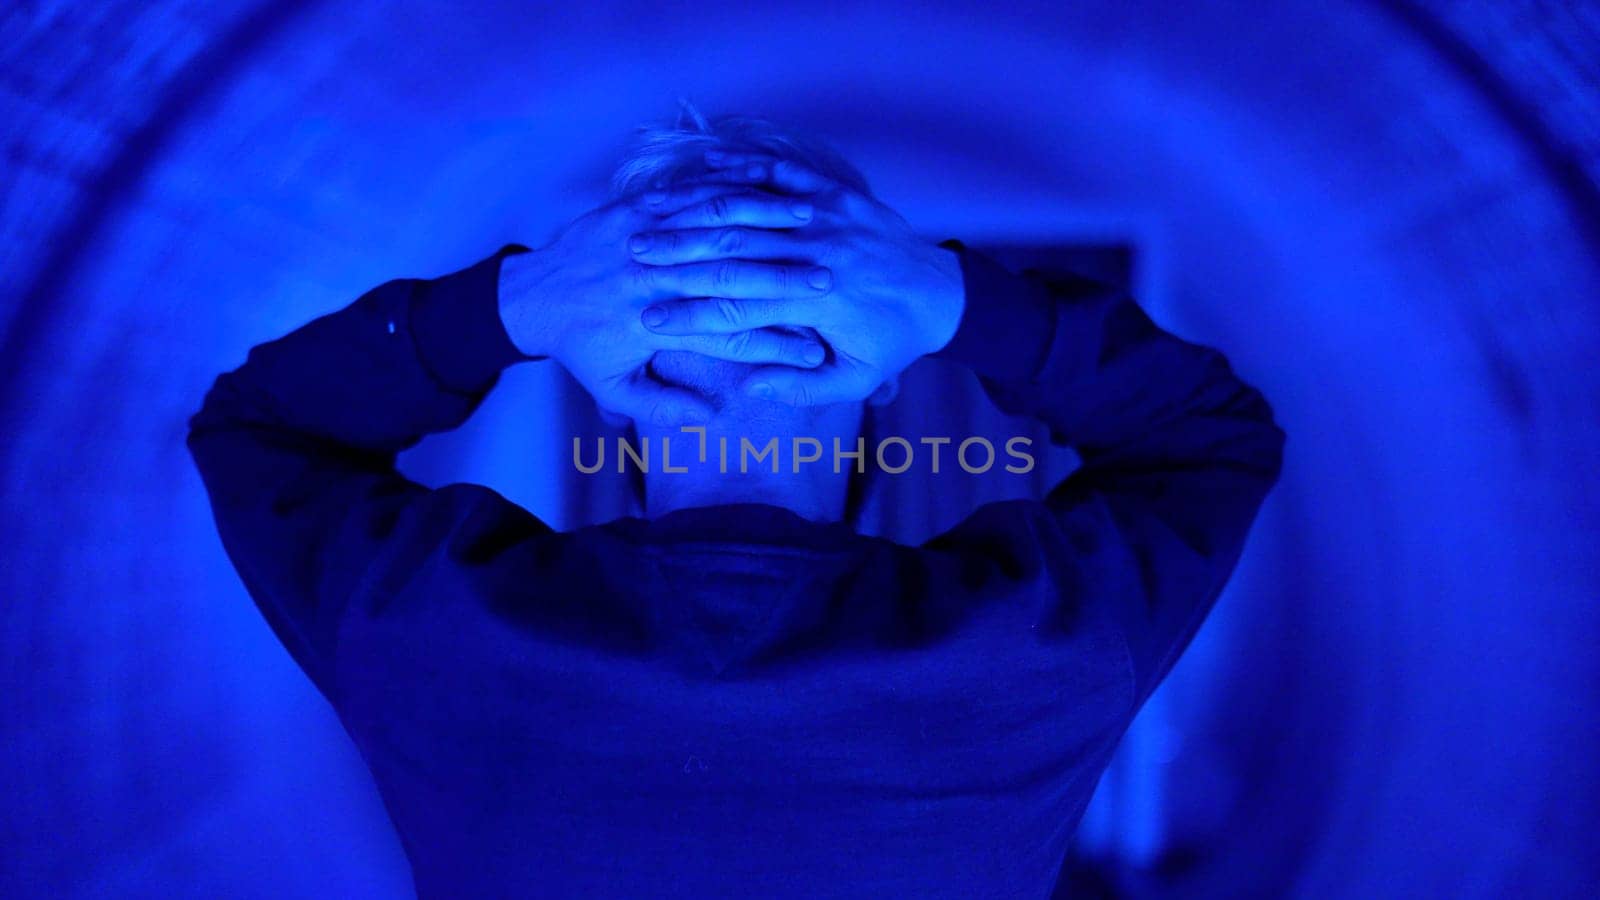 Visualization of how man with claustrophobia feels anxiety in a small room. Media. Concept of mental illness. by Mediawhalestock